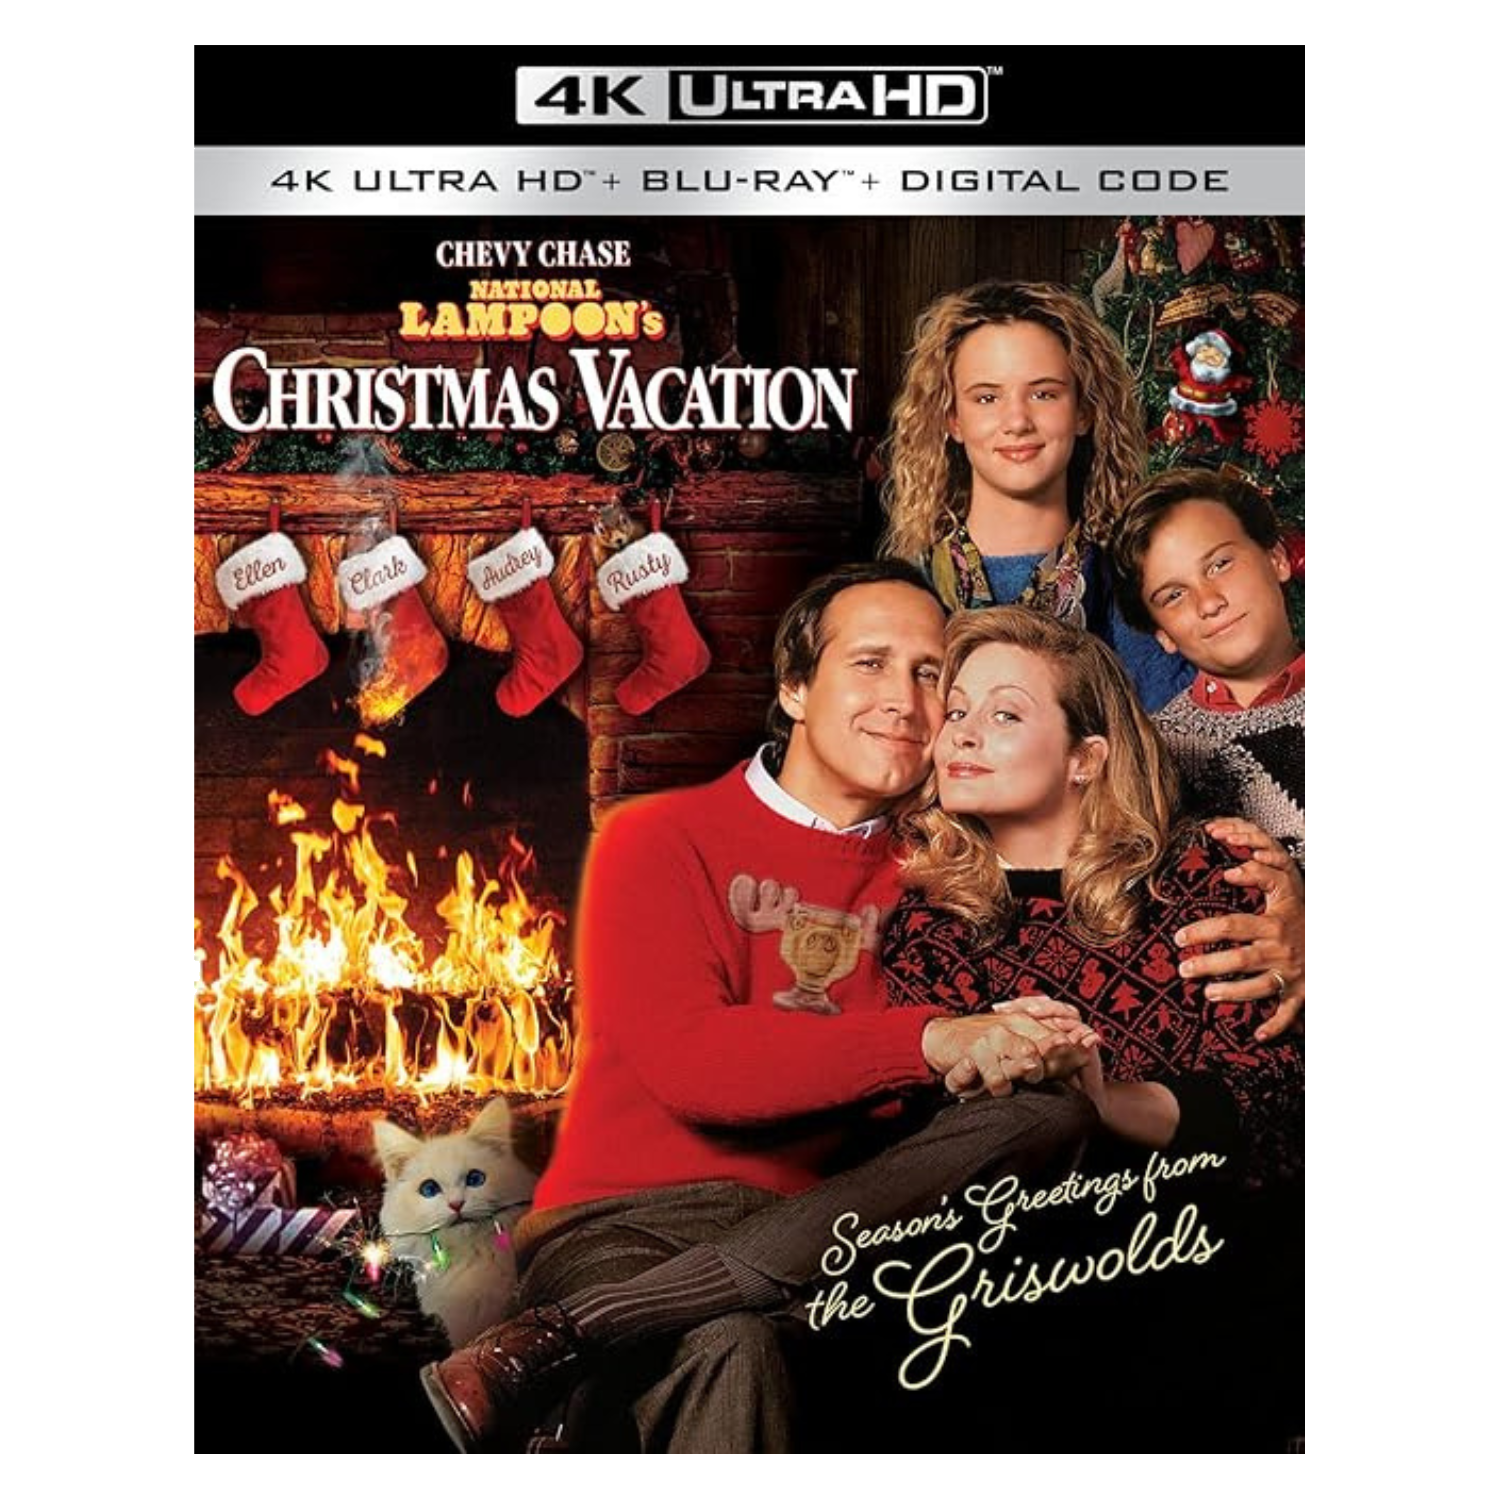 National Lampoon's Christmas Vacation in 4K